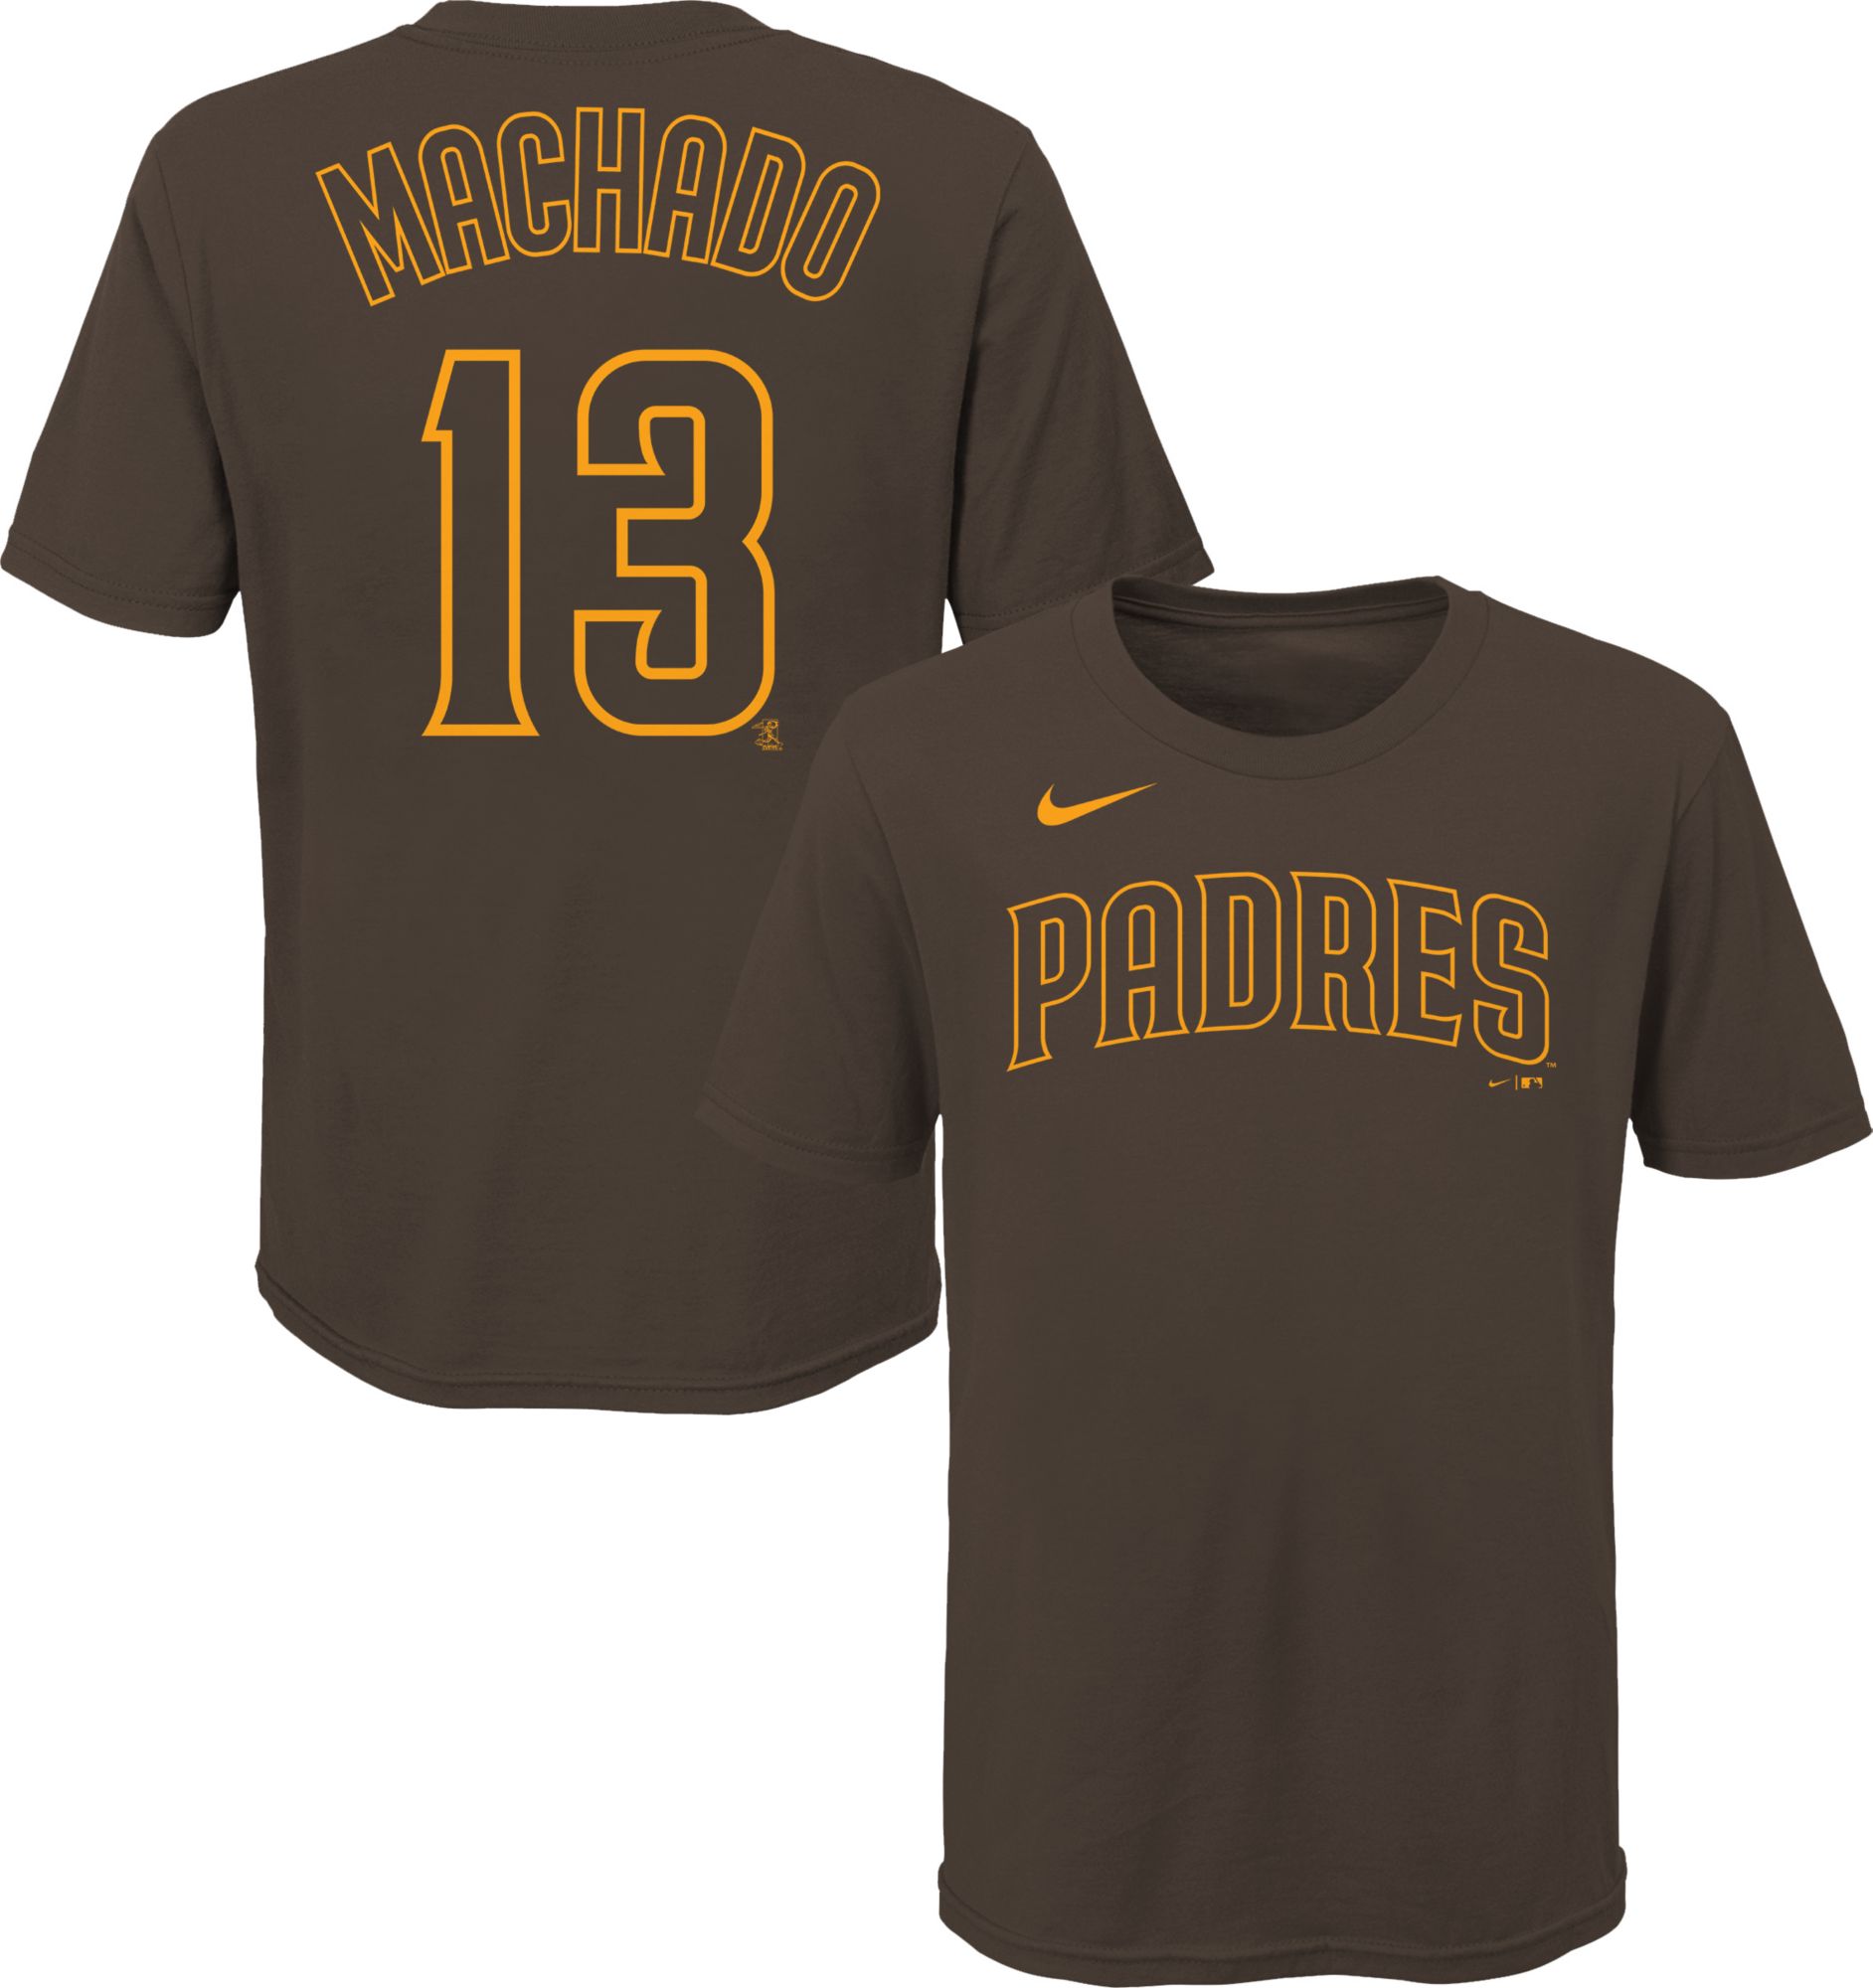 padres youth jersey